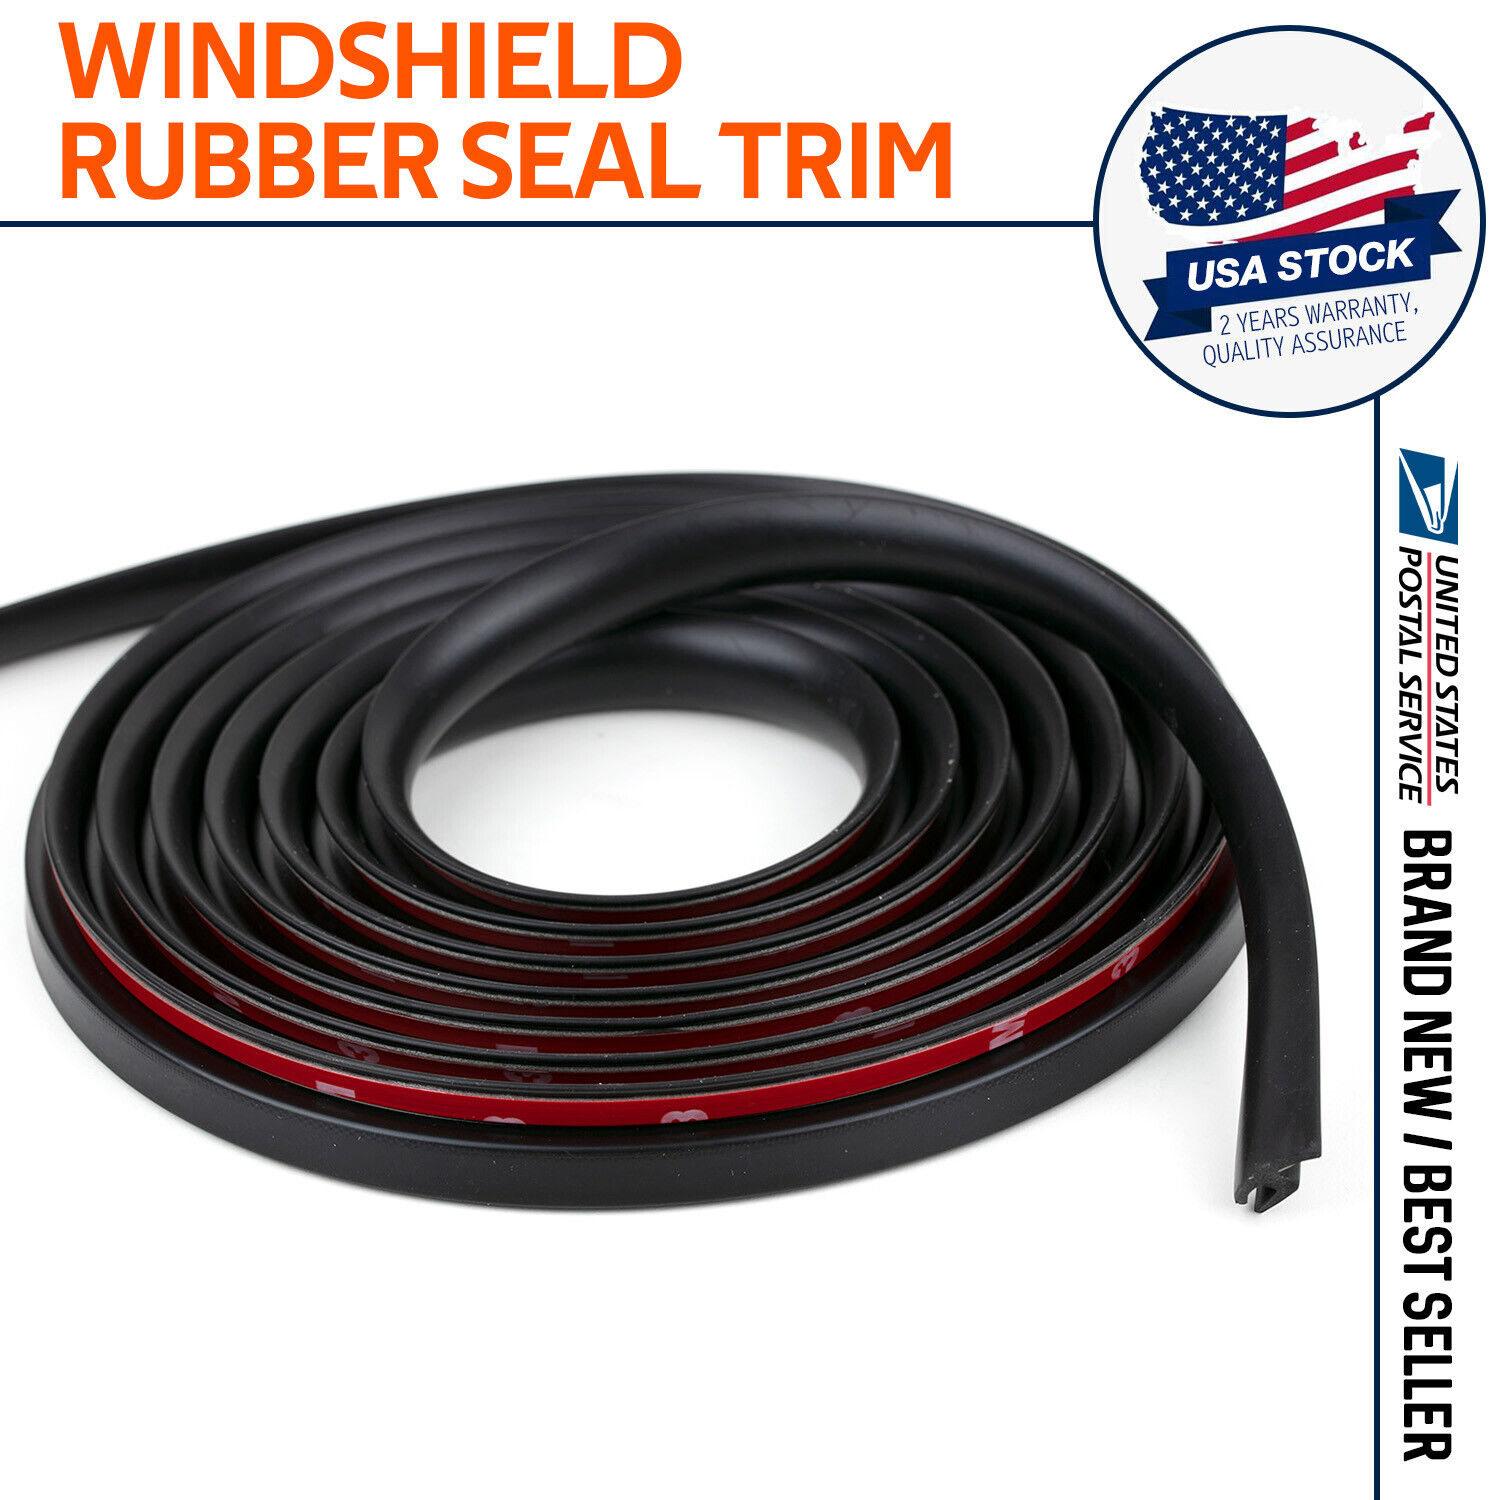 20Ft Car Edge Trim Guard Molding Rubber Seal Strip Protector Fit for Nissan GT-R